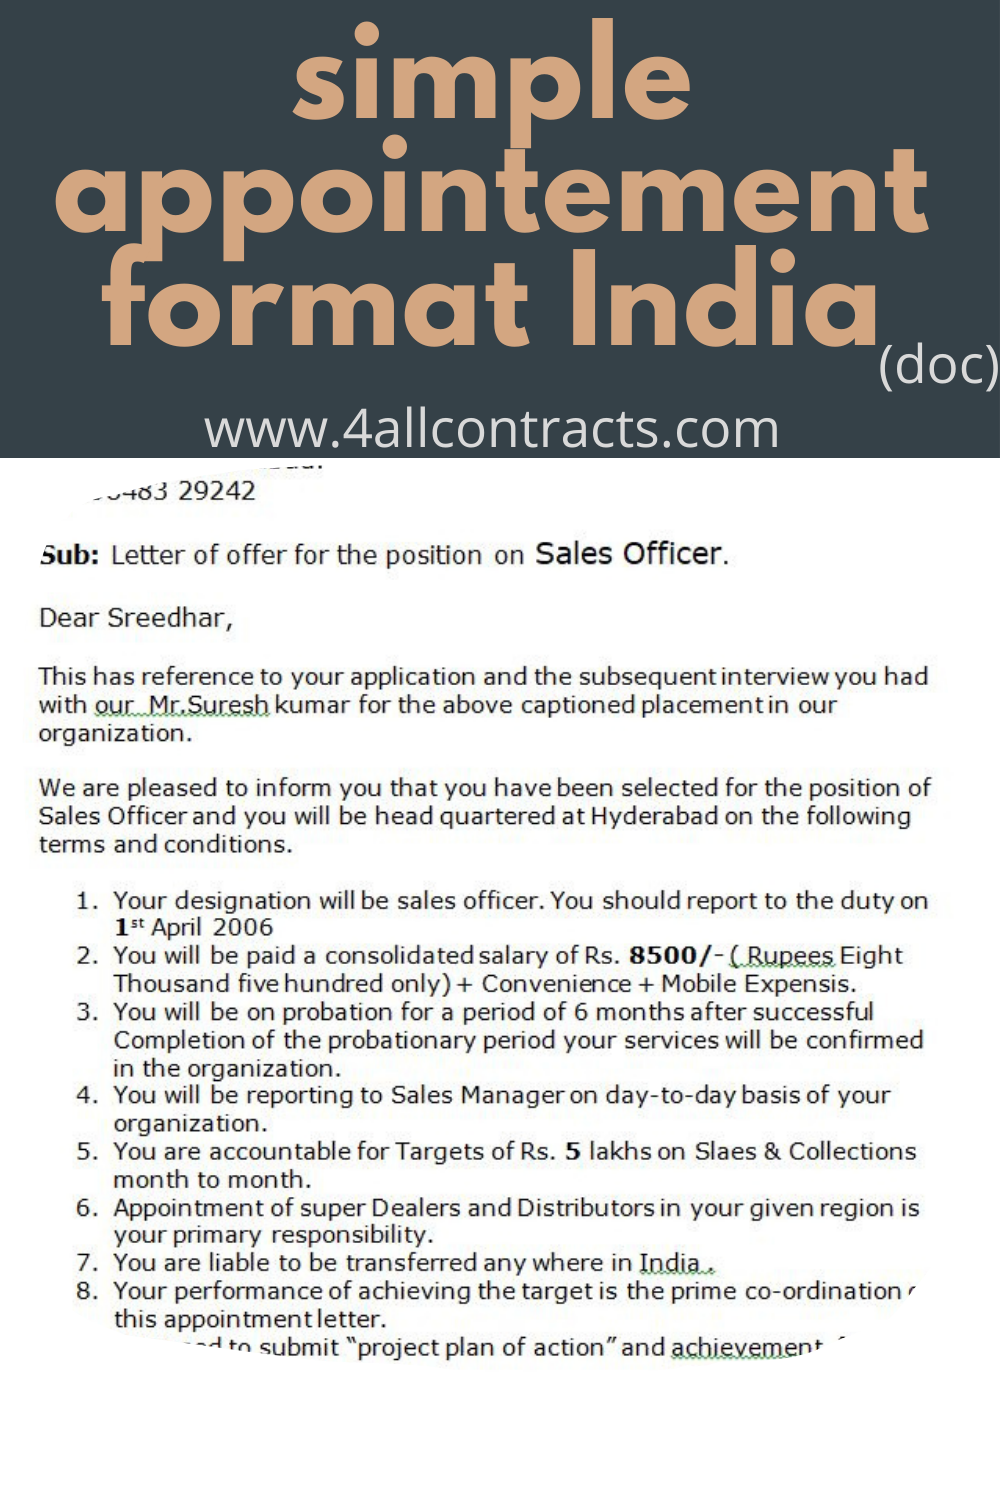 appointment letter format india doc